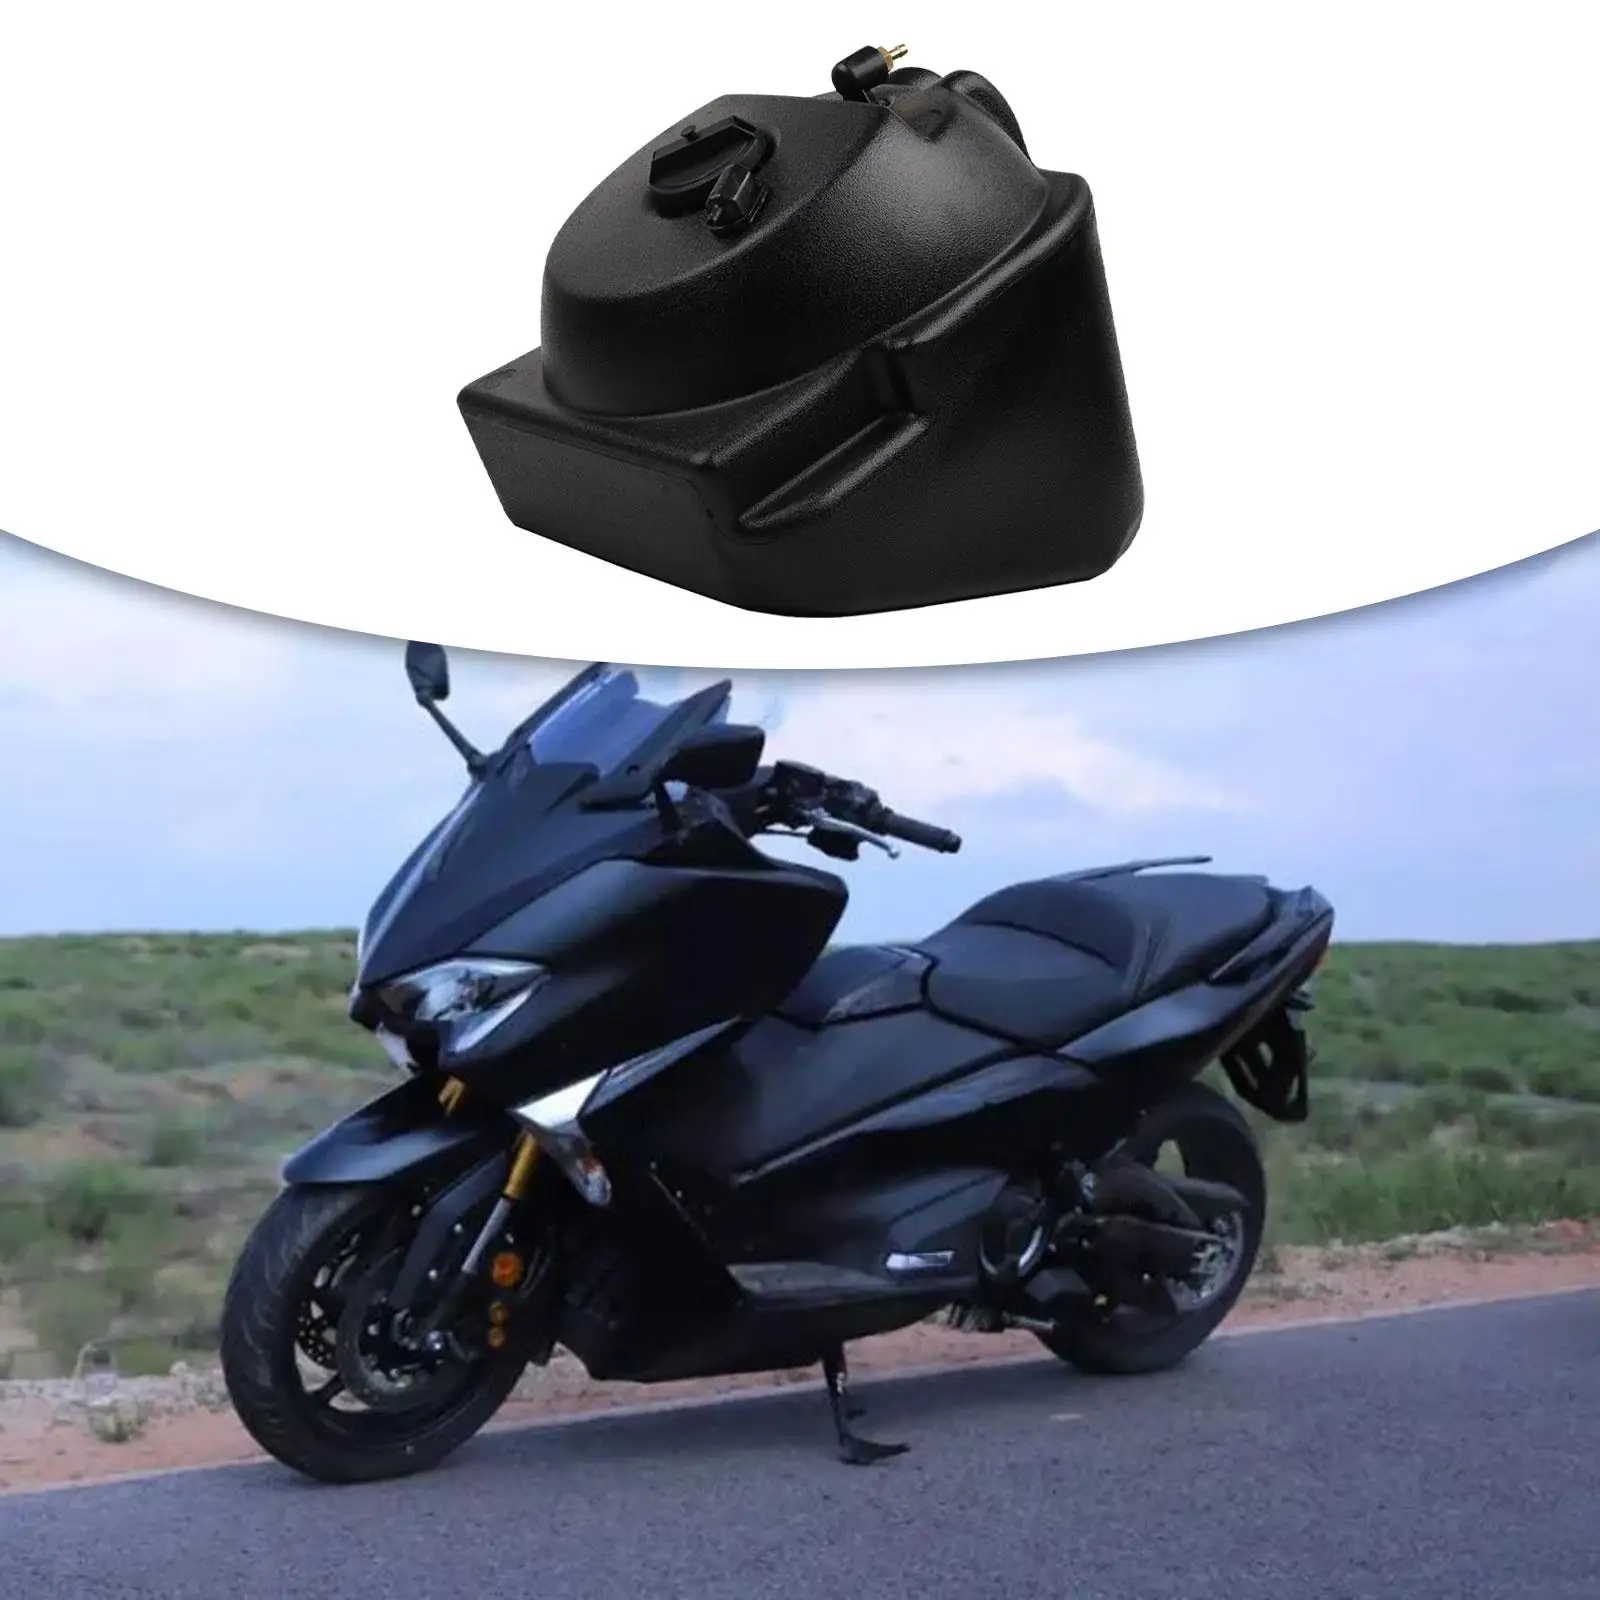 Auxiliary Fuel Tank Refitted Fuel Tank Replacement Durable Motorcycle Fuel Tank for Yamaha Tmax560 Nmax155 Xmax300 Xmax250